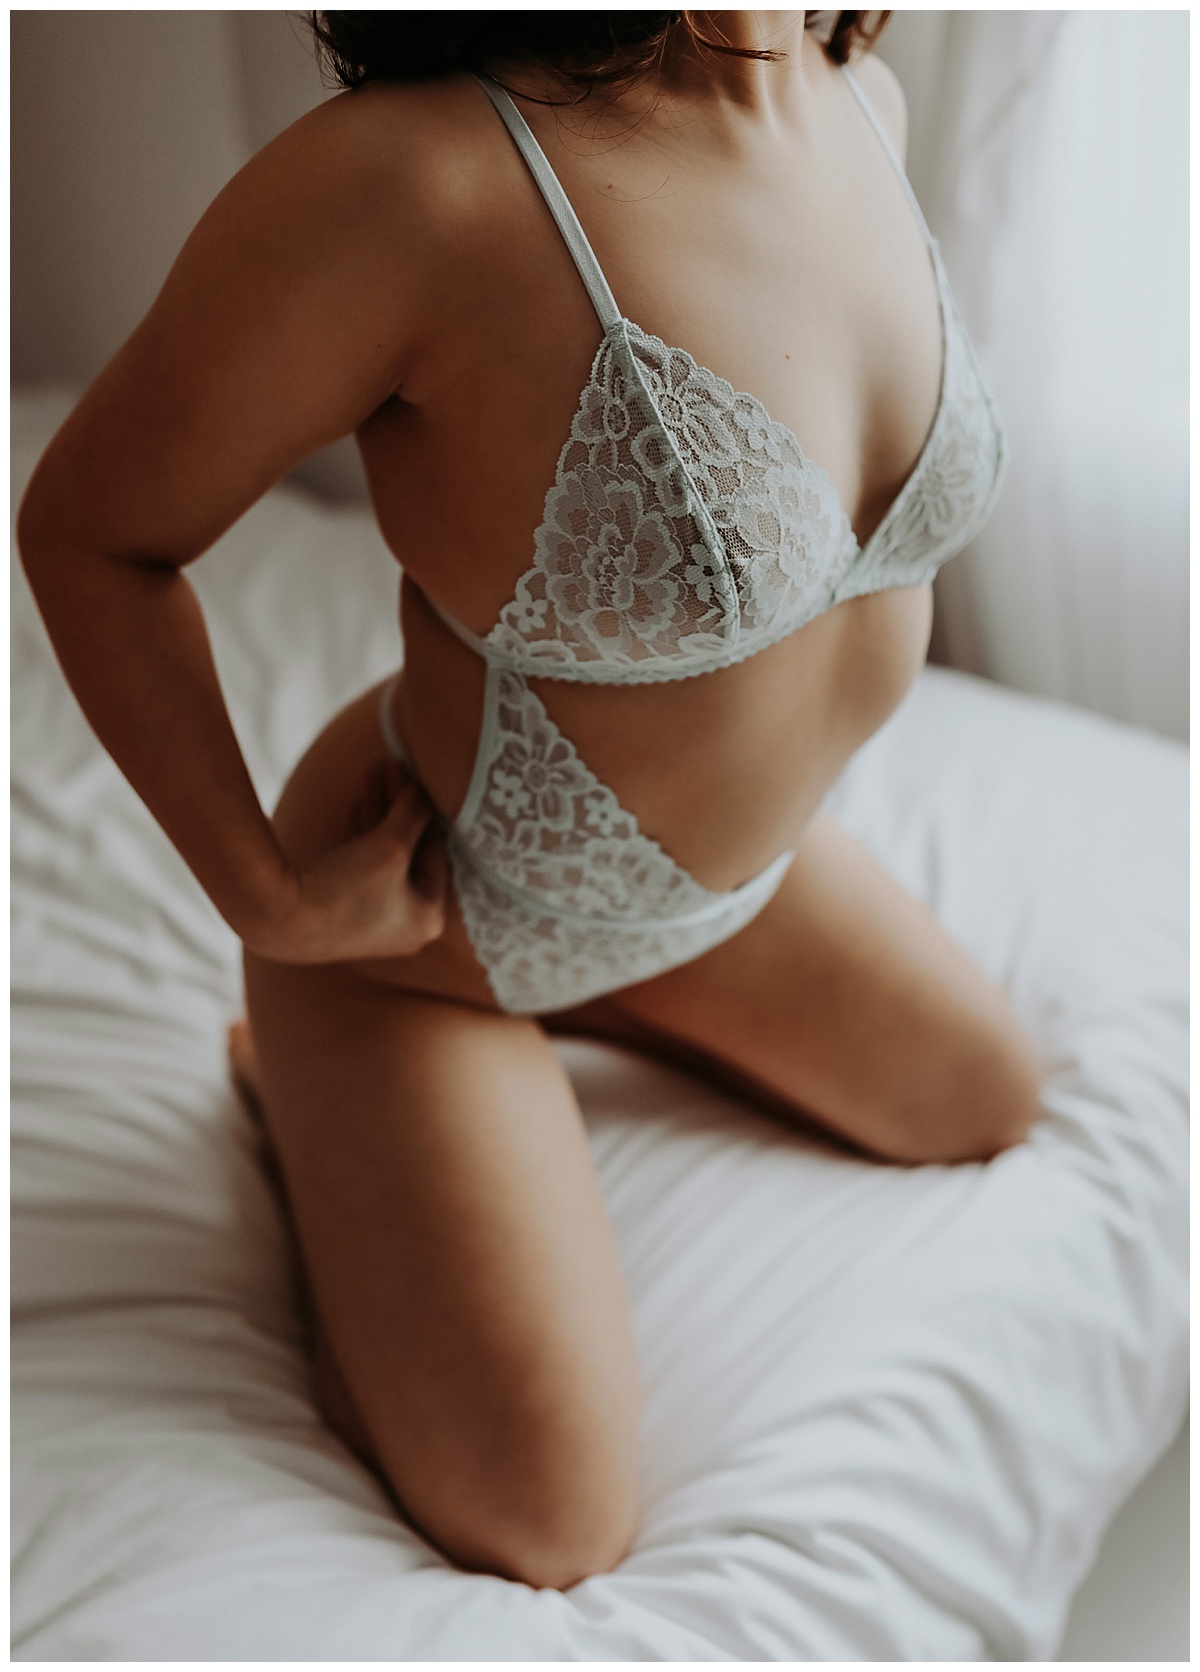 Female in baby blue lingerie for Mary Castillo Photography